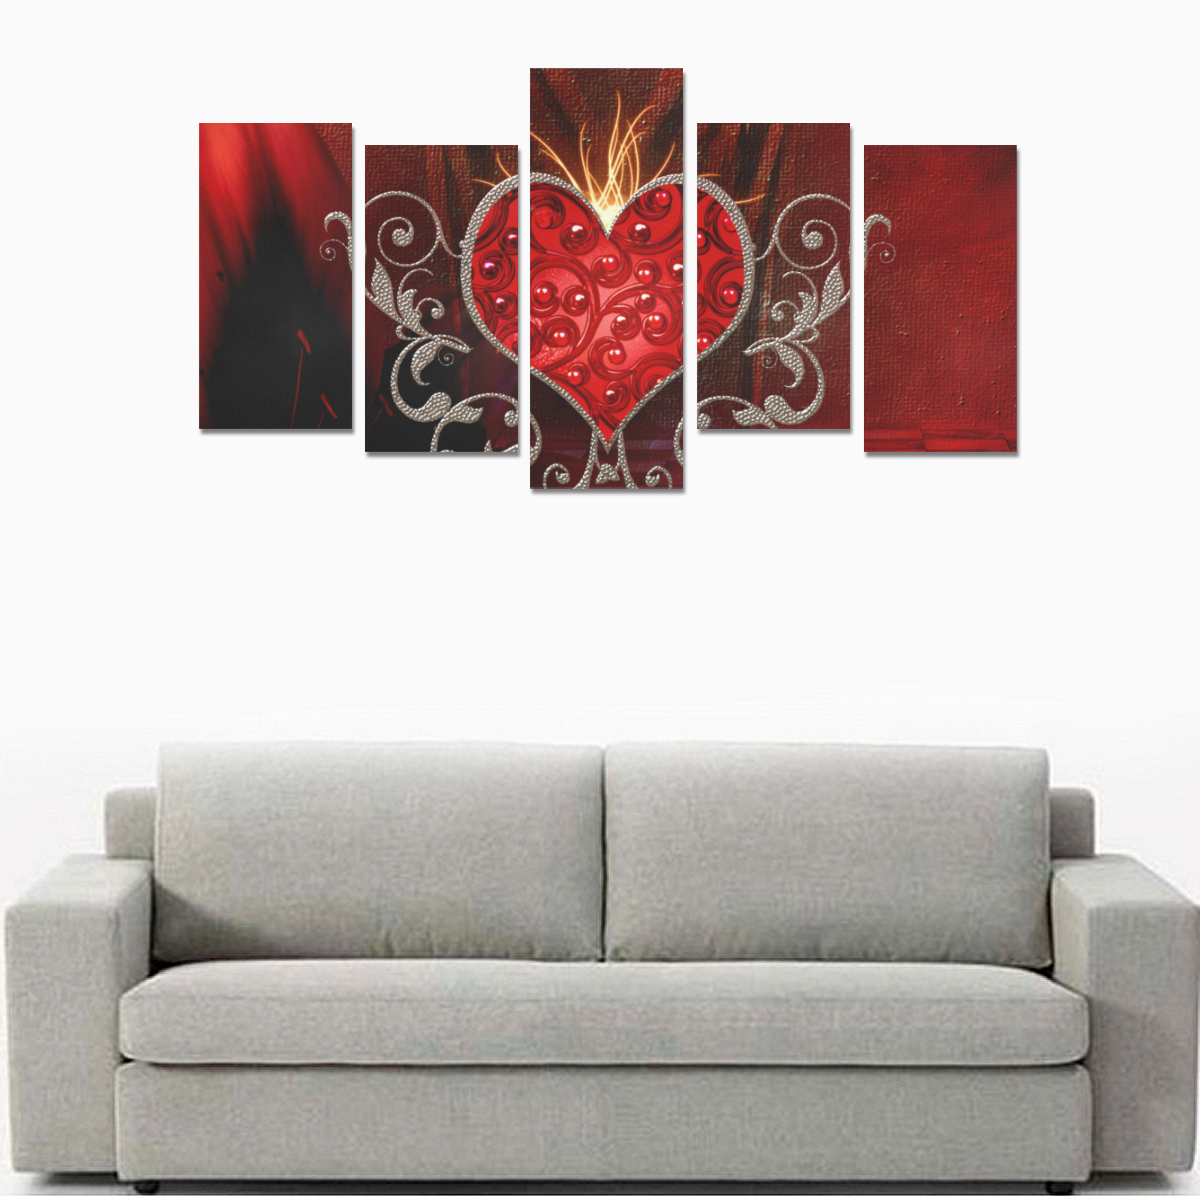 Wonderful heart with wings Canvas Print Sets E (No Frame)